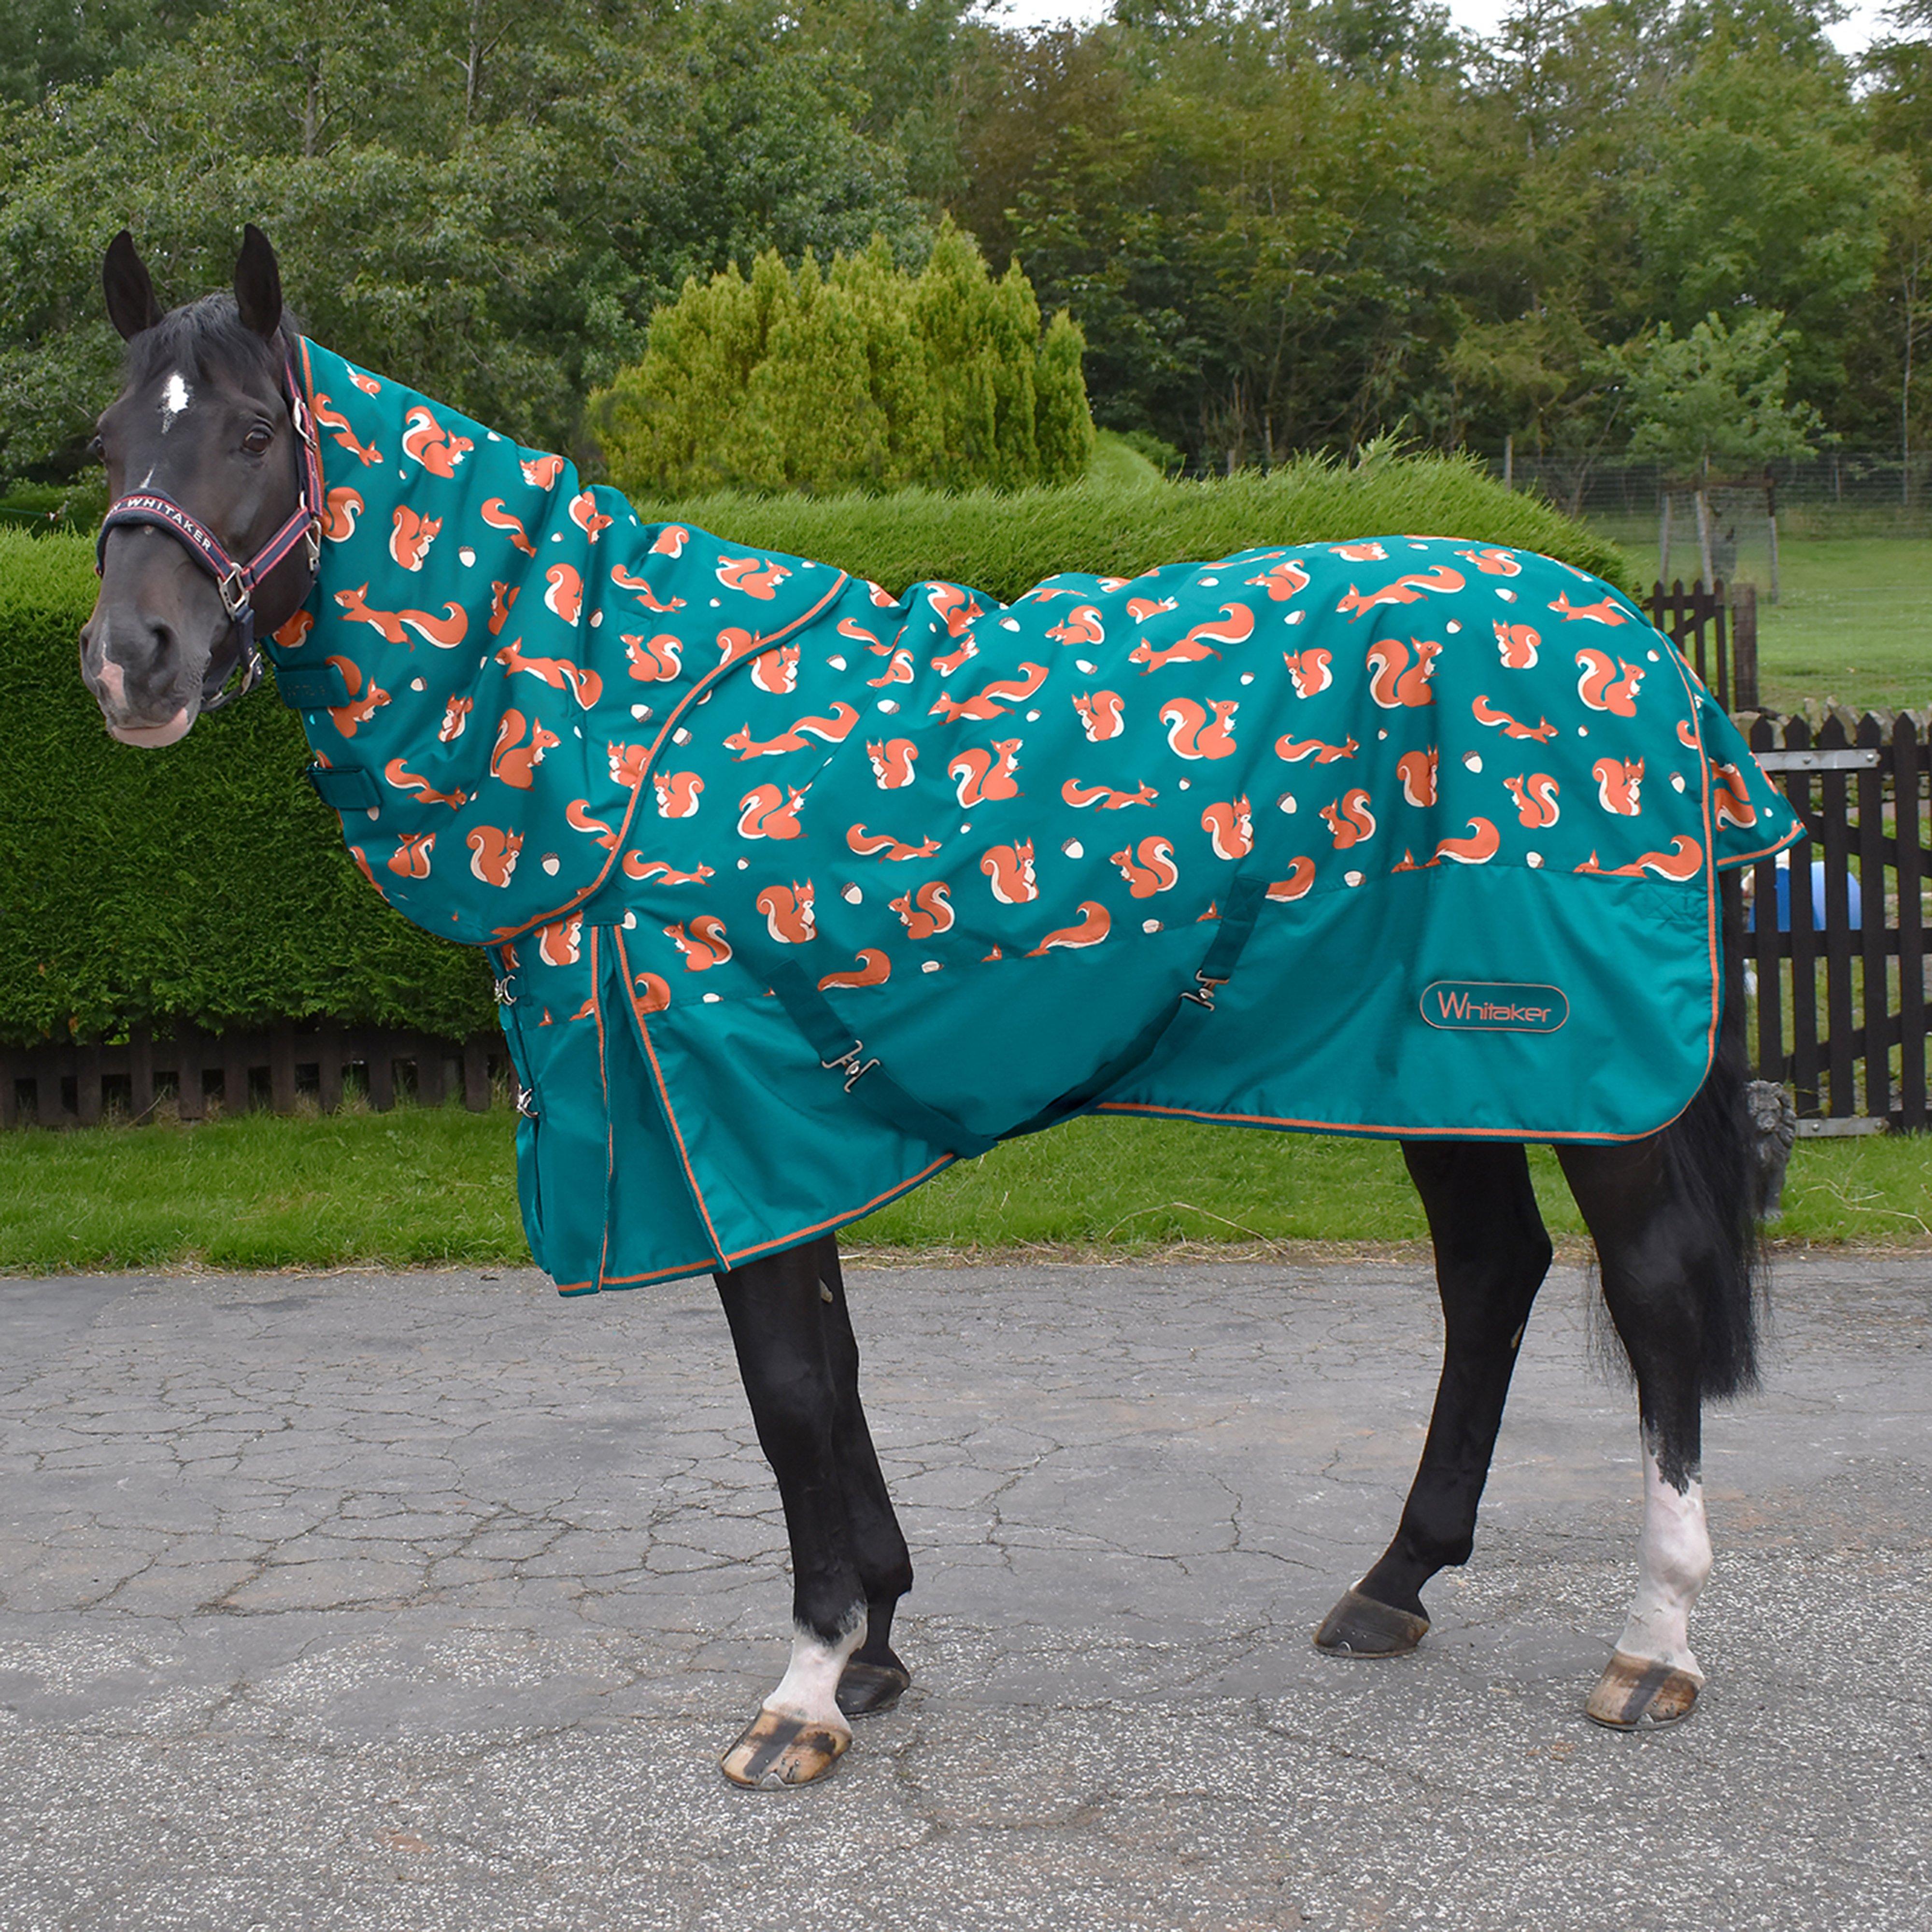  Whitaker Knutsford Squirrel Combo Turnout Rug, Blue